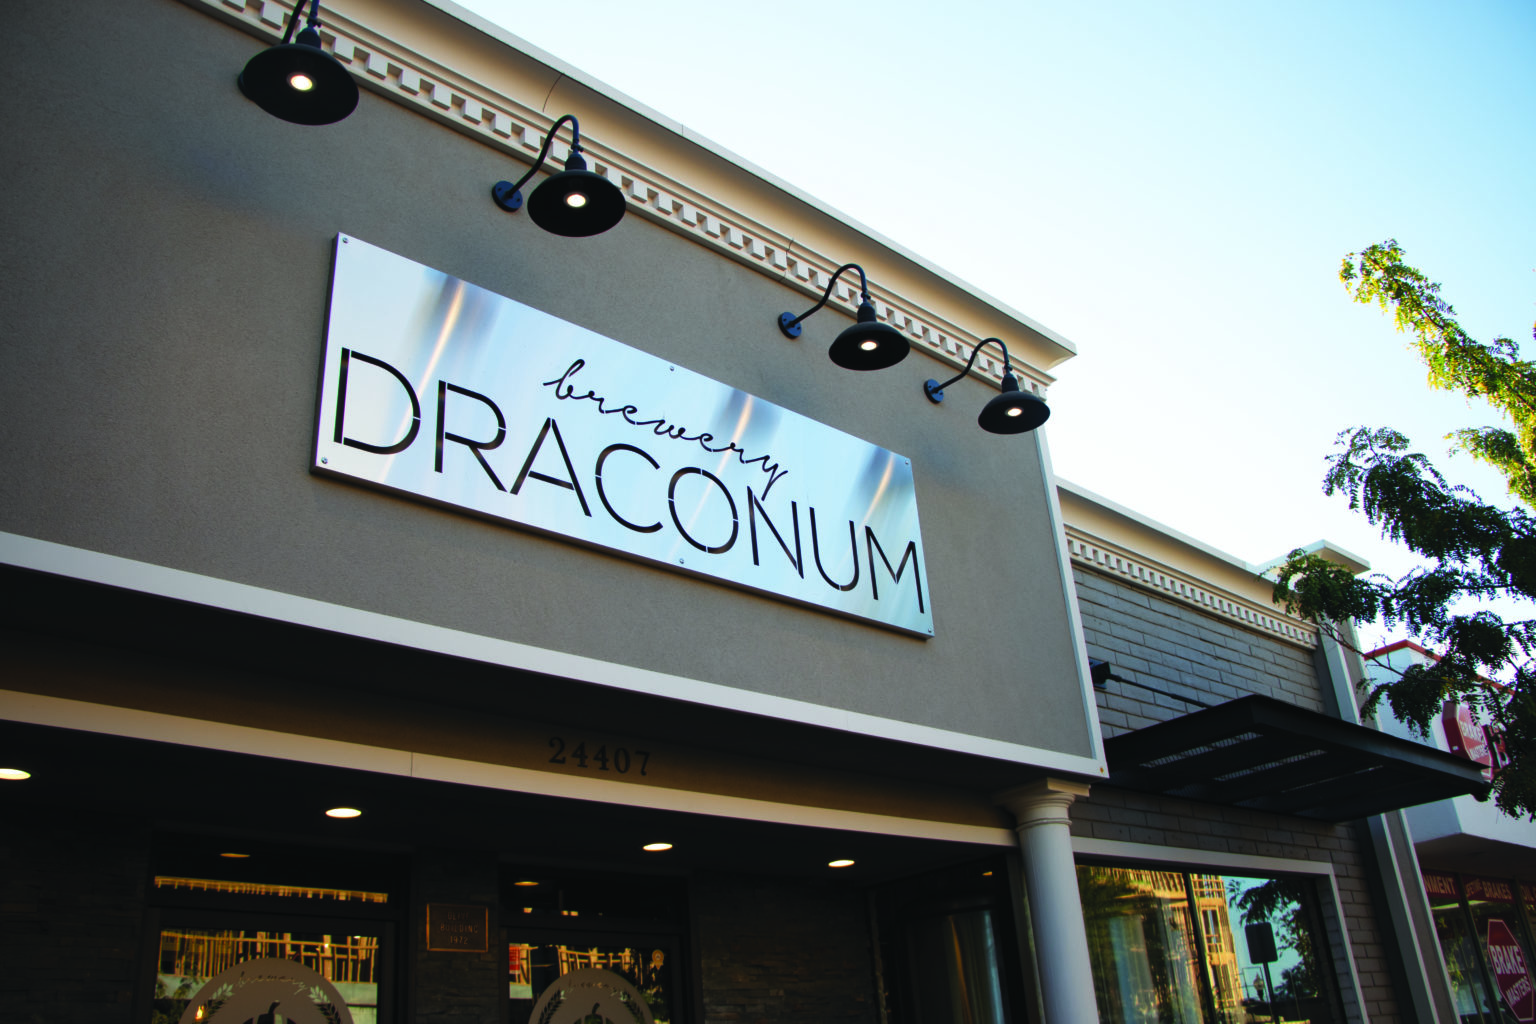 Brewery Draconum sign